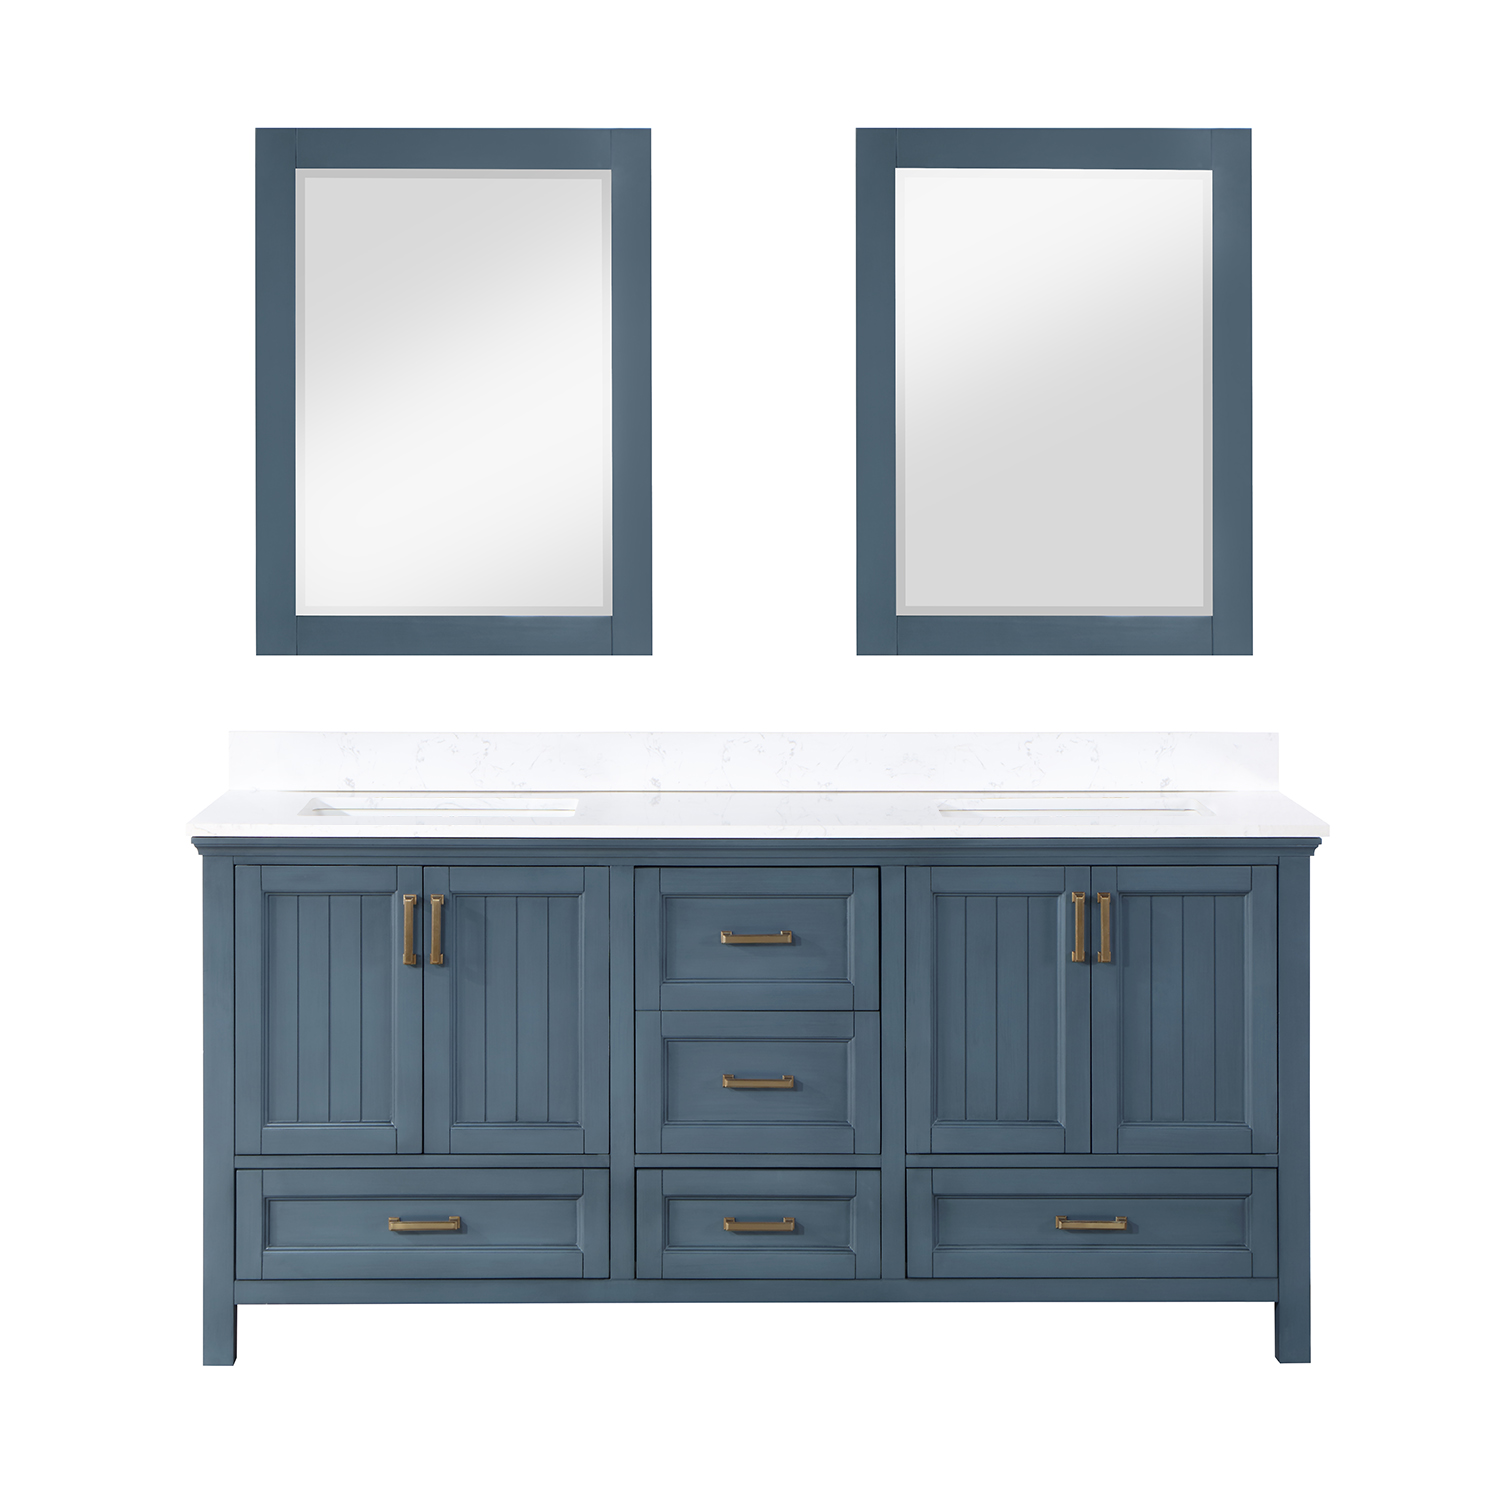 Issac Edwards Collection 72" Double Bathroom Vanity Set in Classic Blue and Composite Carrara White Stone Countertop without Mirror 